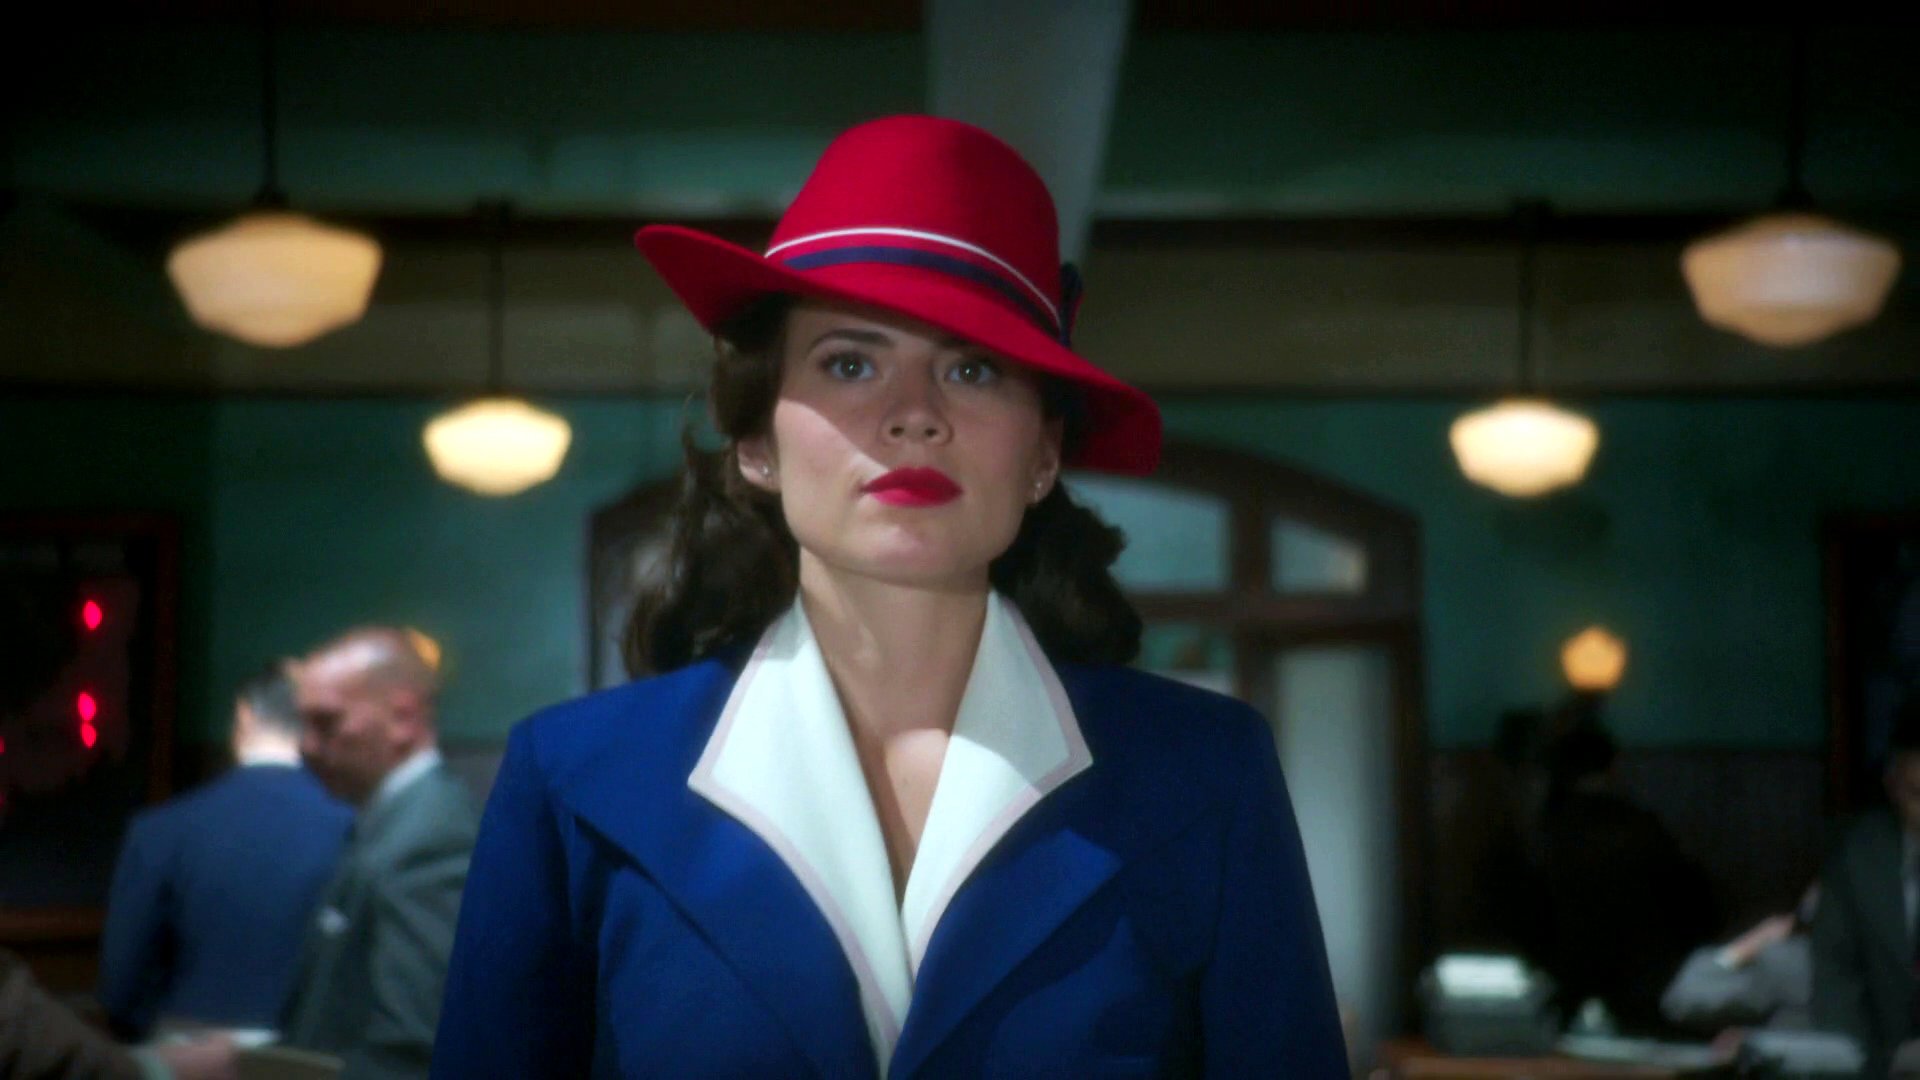 Agent Carter: Now Is Not the End.